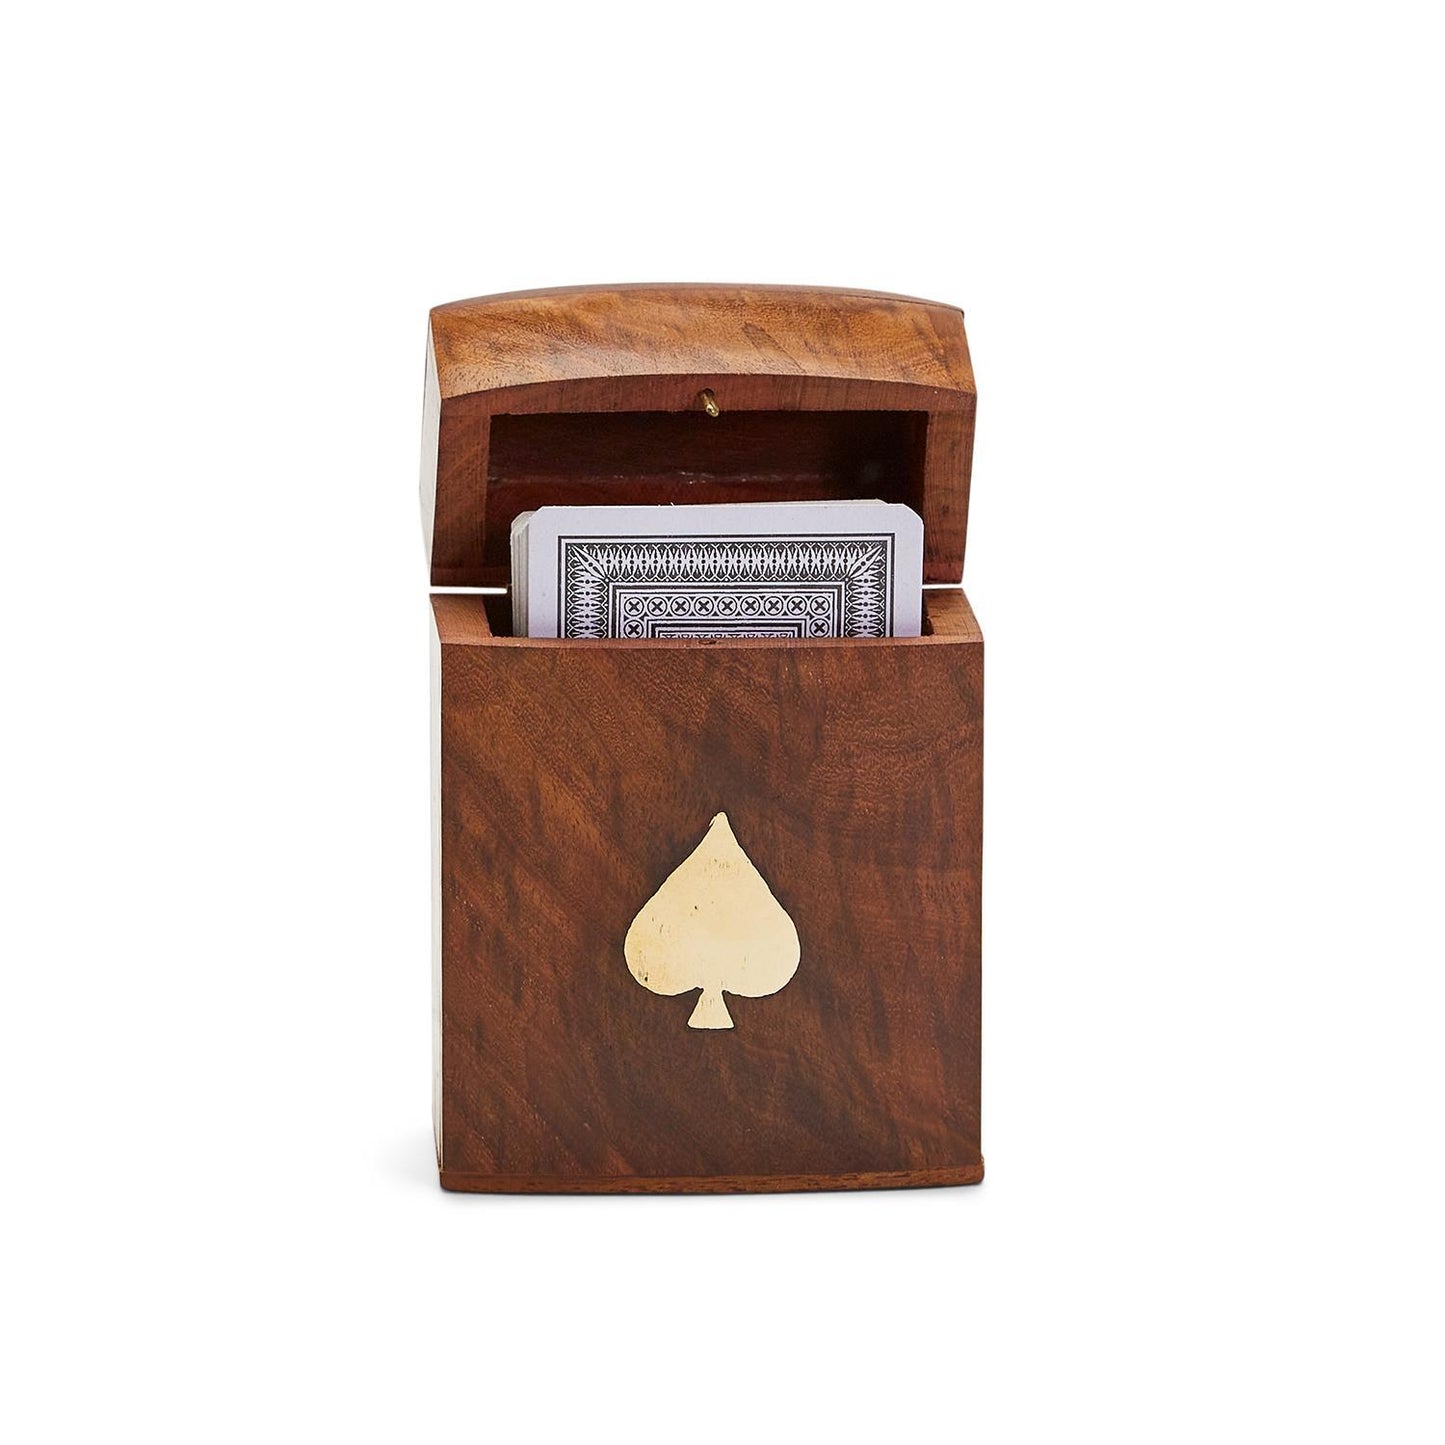 Playing Card Set in Hand-Crafted Wooden Box (includes 52 cards and 2 jokers) - Acacia Wood/Brass/Paper